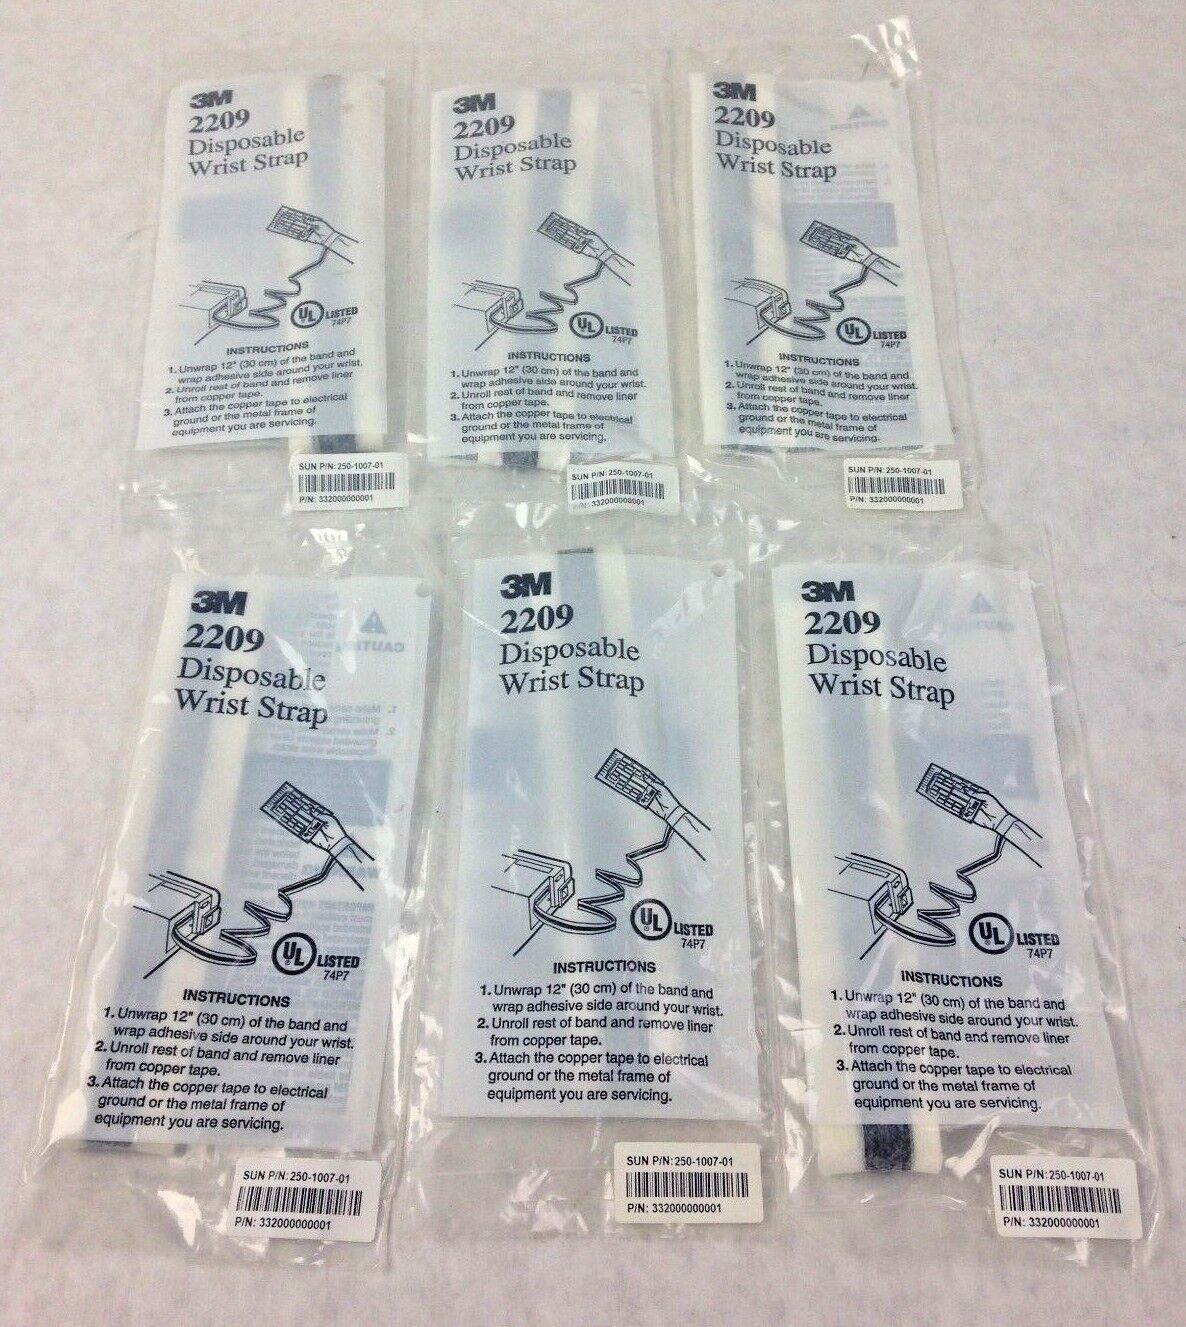 SUN 250-1007-01 Brand 3M 2209 Static Protection Wrist Grounder Lot of (6)